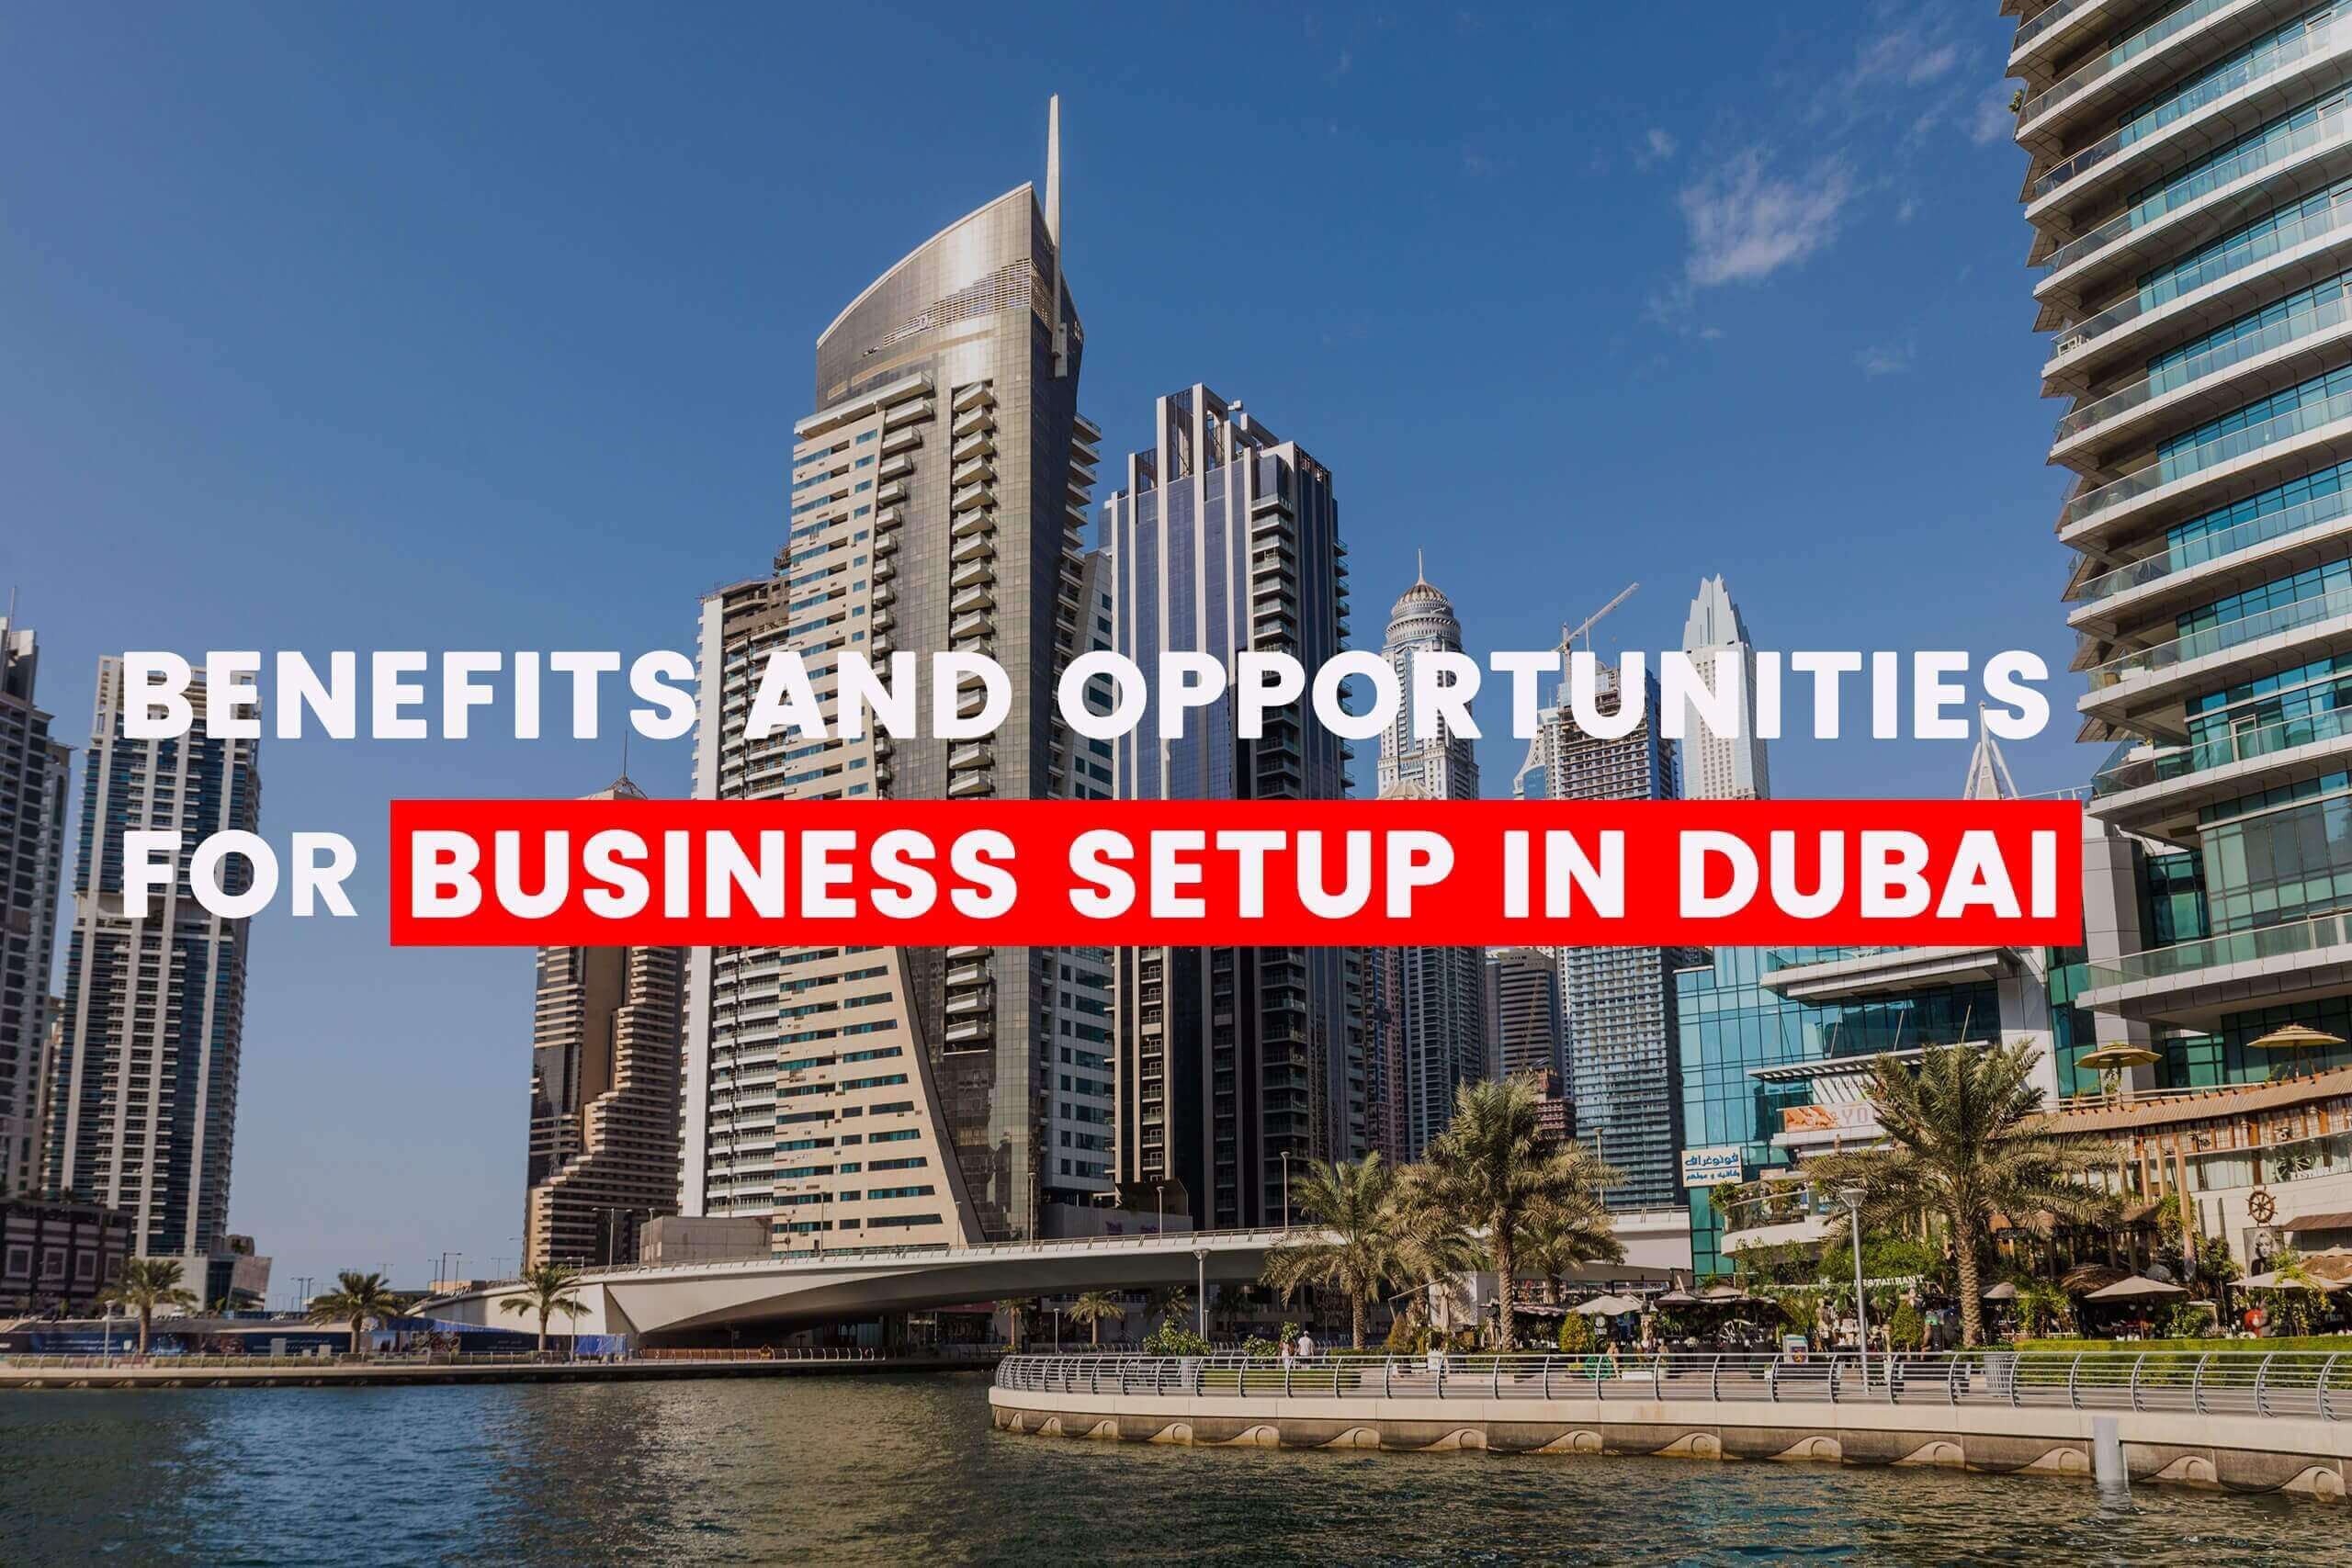 Benefits and Opportunities for Business Setup Dubai